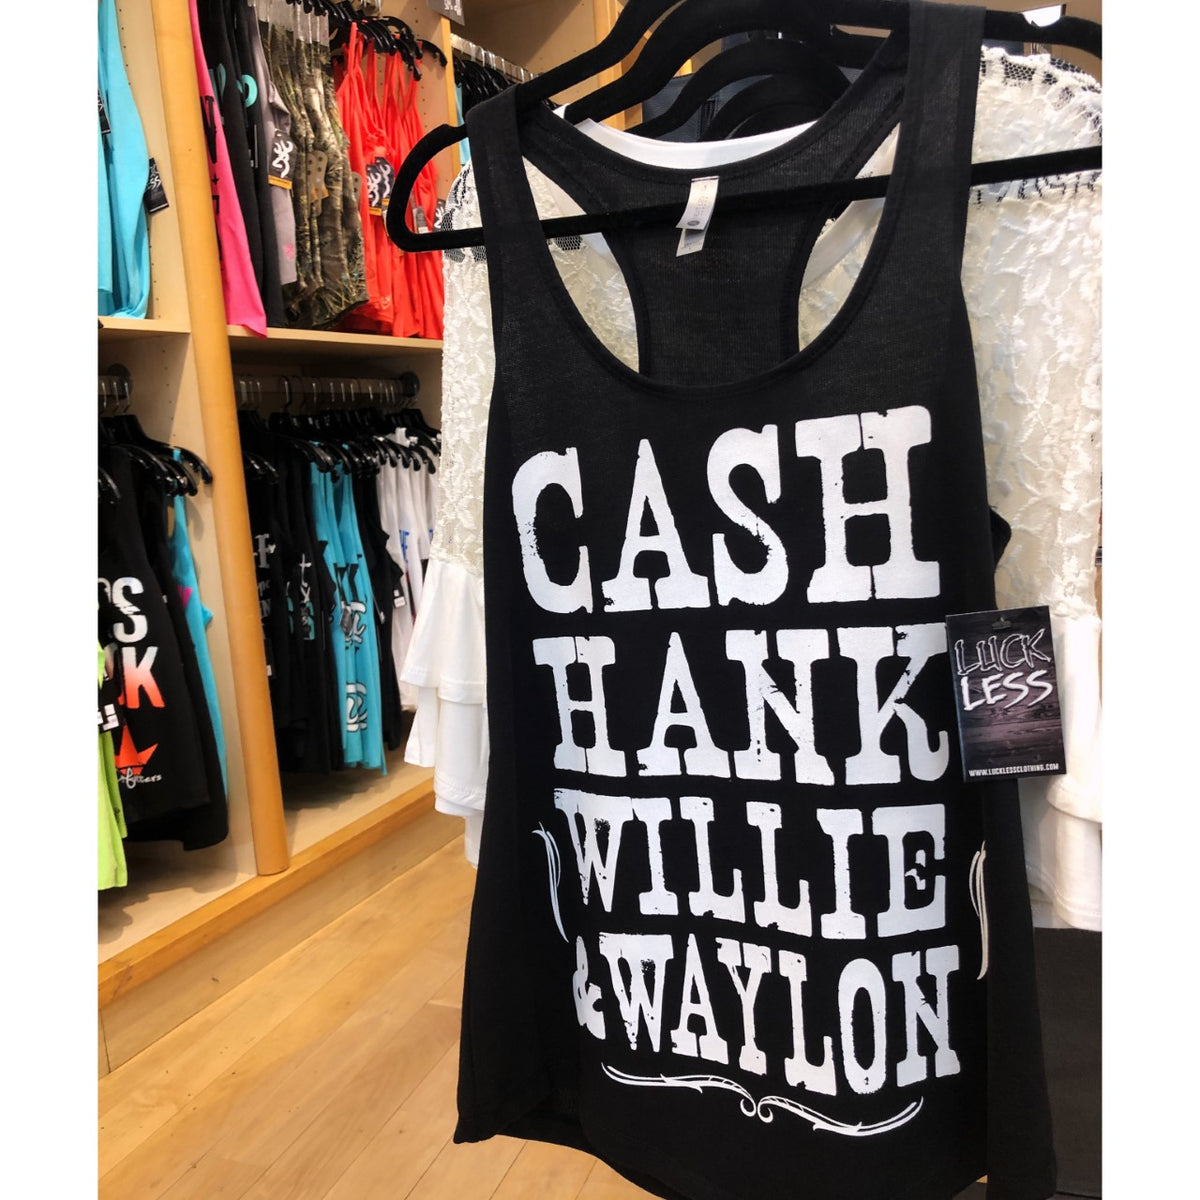 Cash Hank Willie & Waylon (Multiple Styles) – Luckless Outfitters